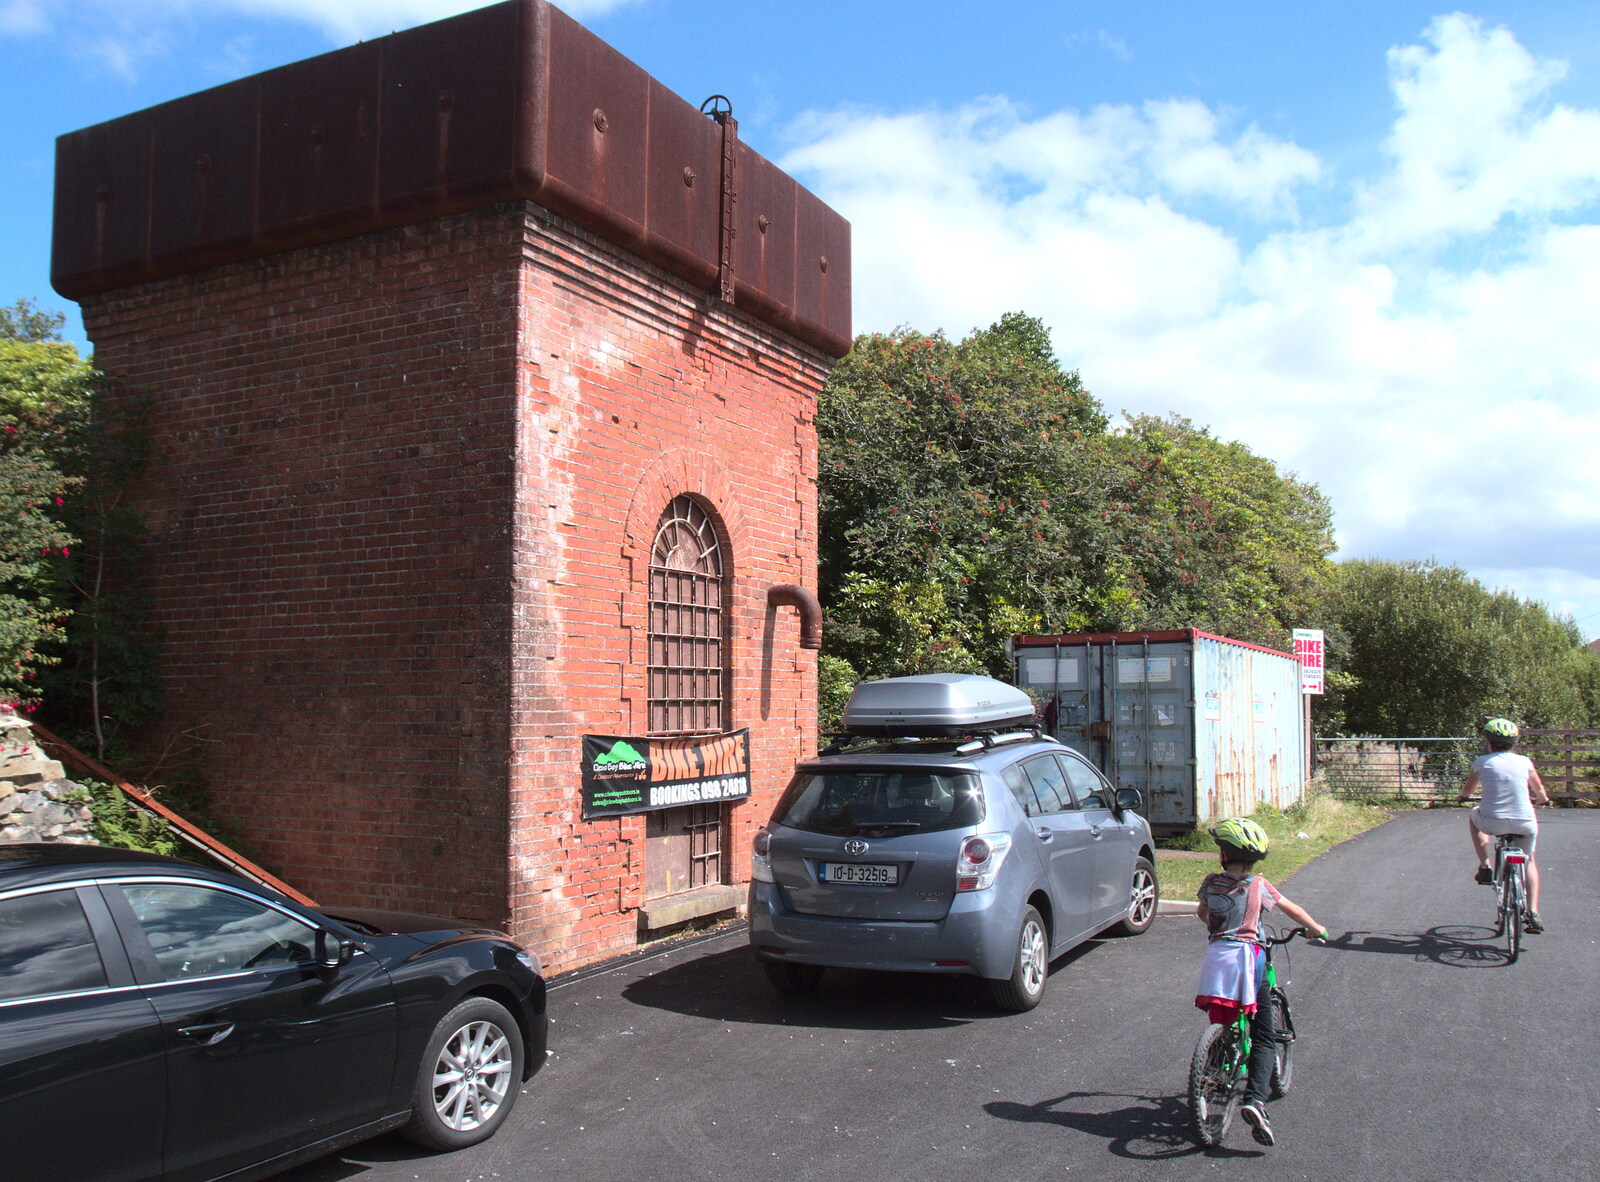 A water tower for the steam trains from A Bike Ride to Mulranny, County Mayo, Ireland - 9th August 2017